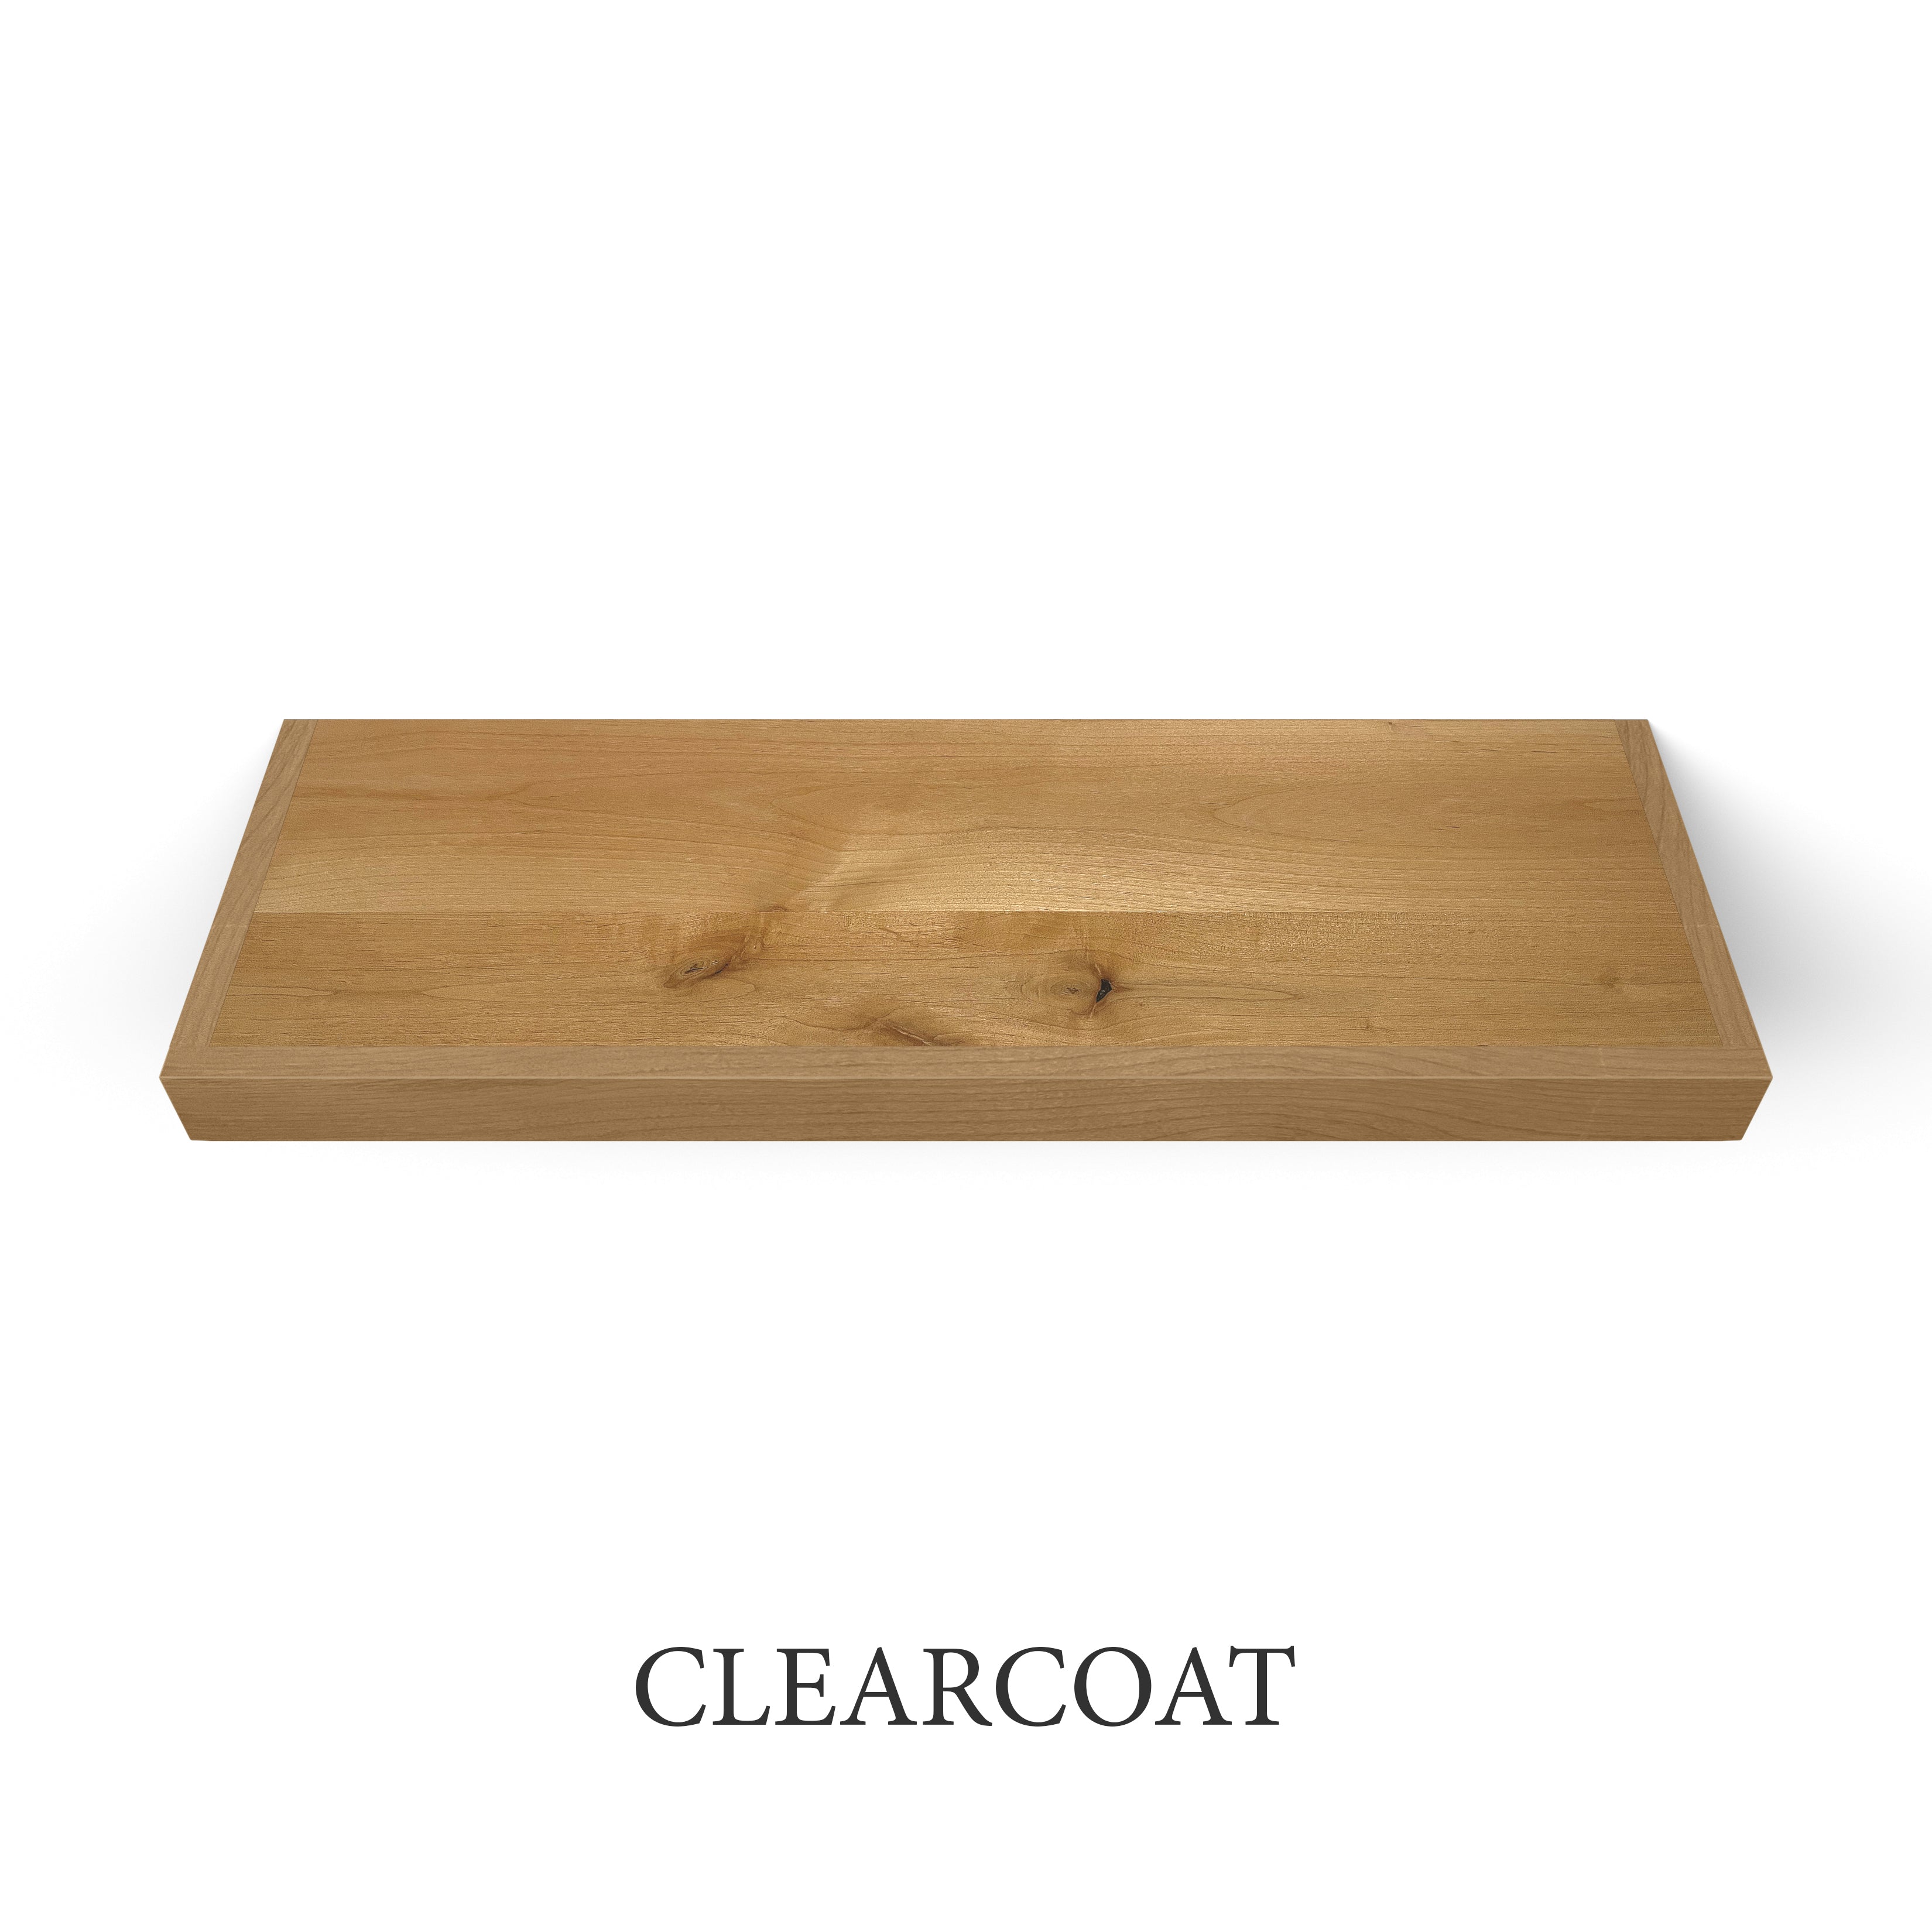 clearcoat Rustic Alder 2 Inch Thick Floating Shelves